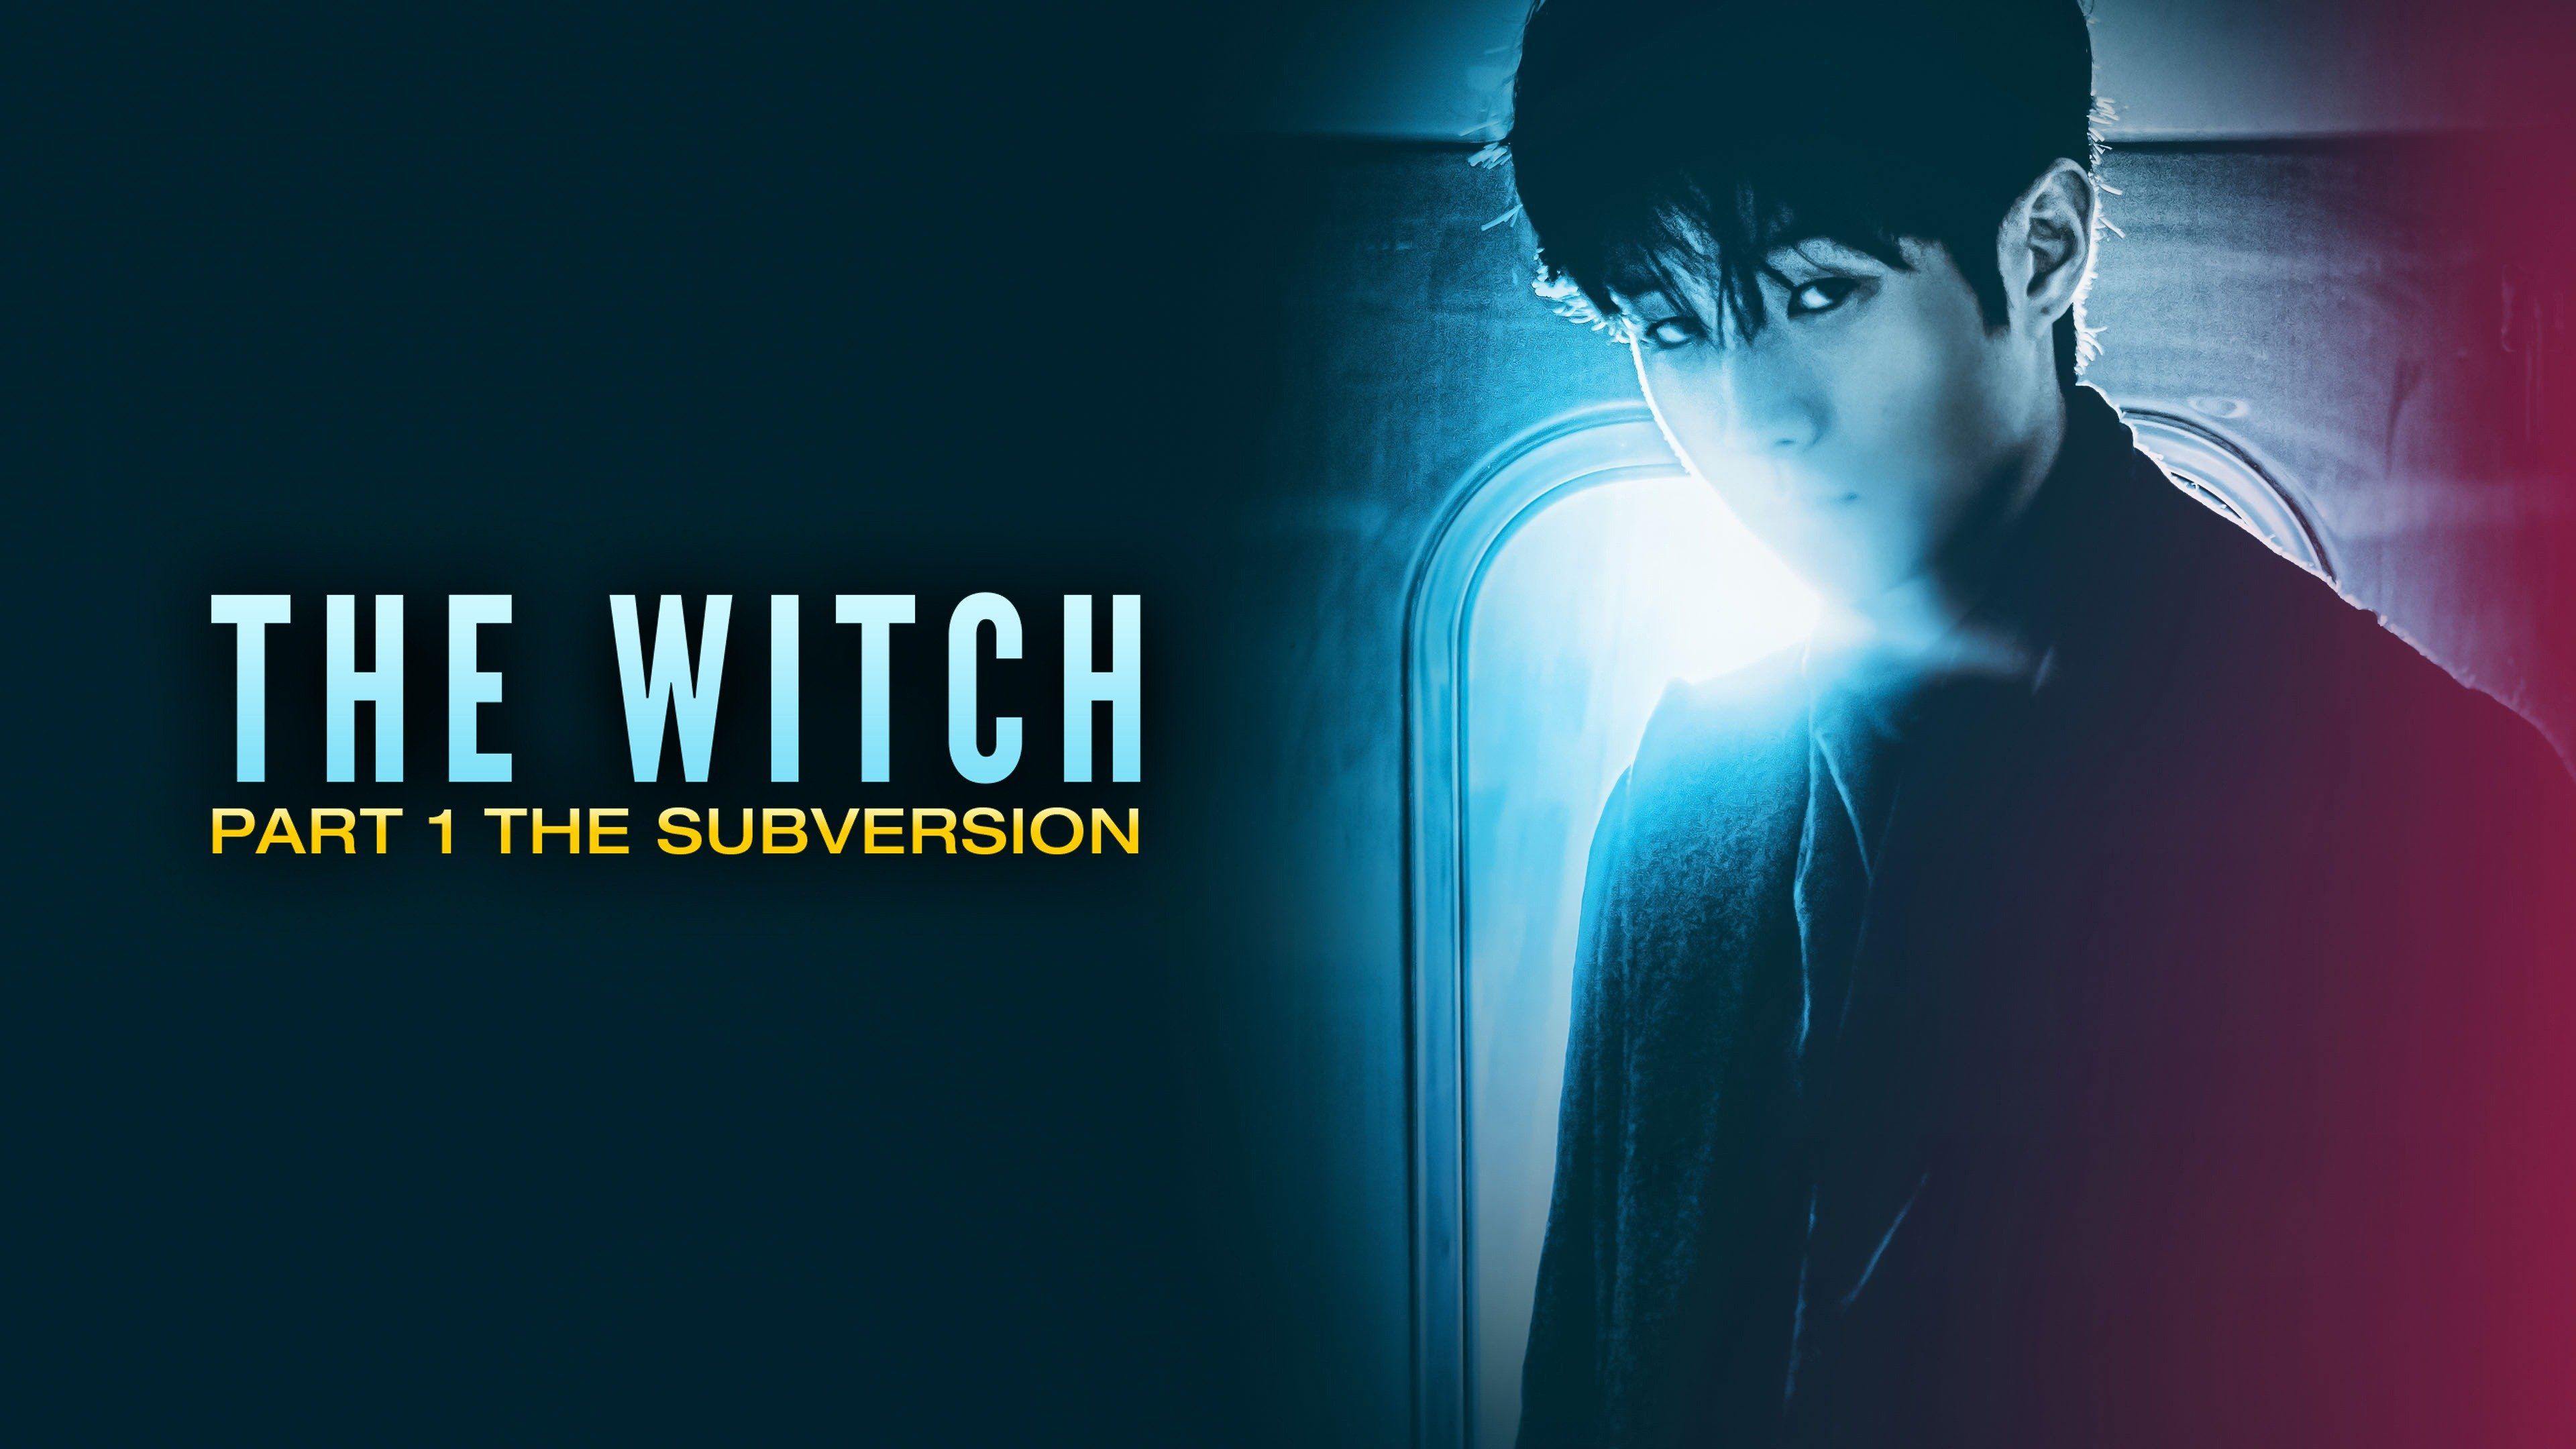 the witch part 1. the subversion explained